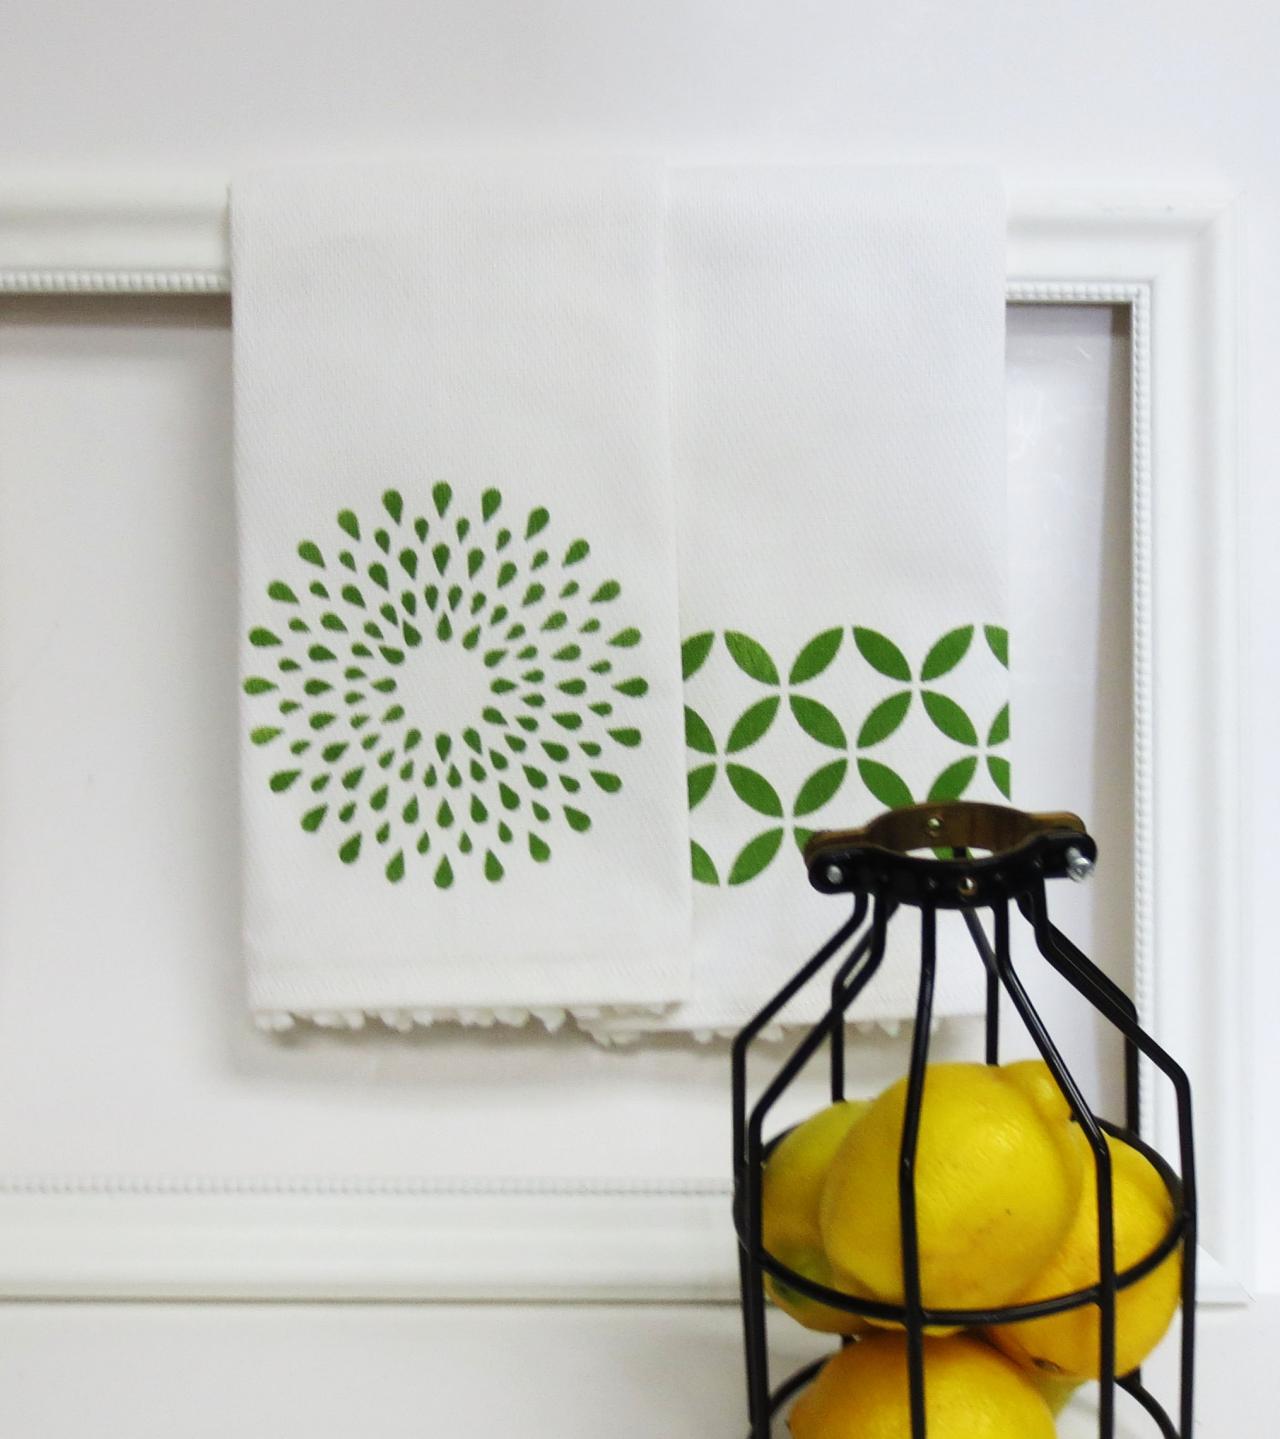 Pair Of Printed Geometric Tea Towels With White Pom Pom Trim Your Choice Of Print Color